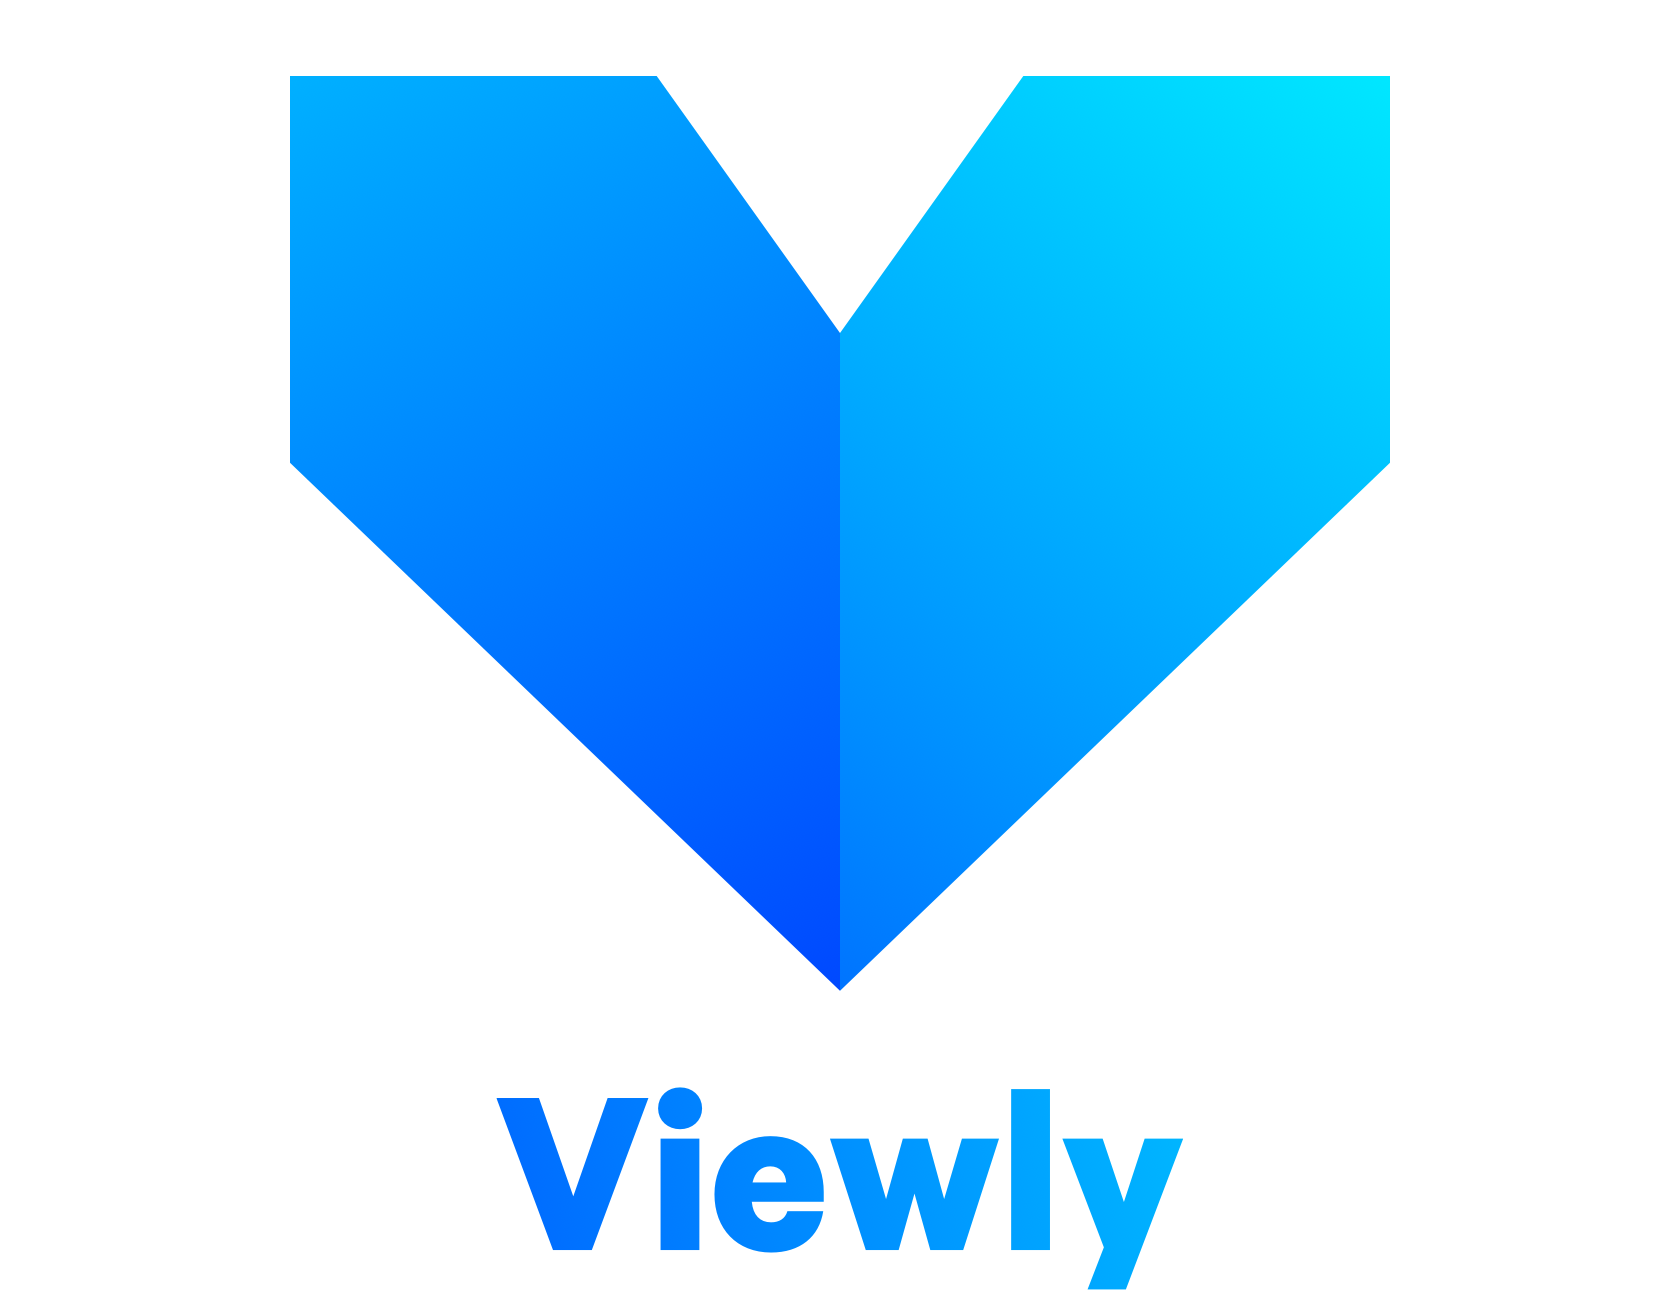 View ly. View ICO.